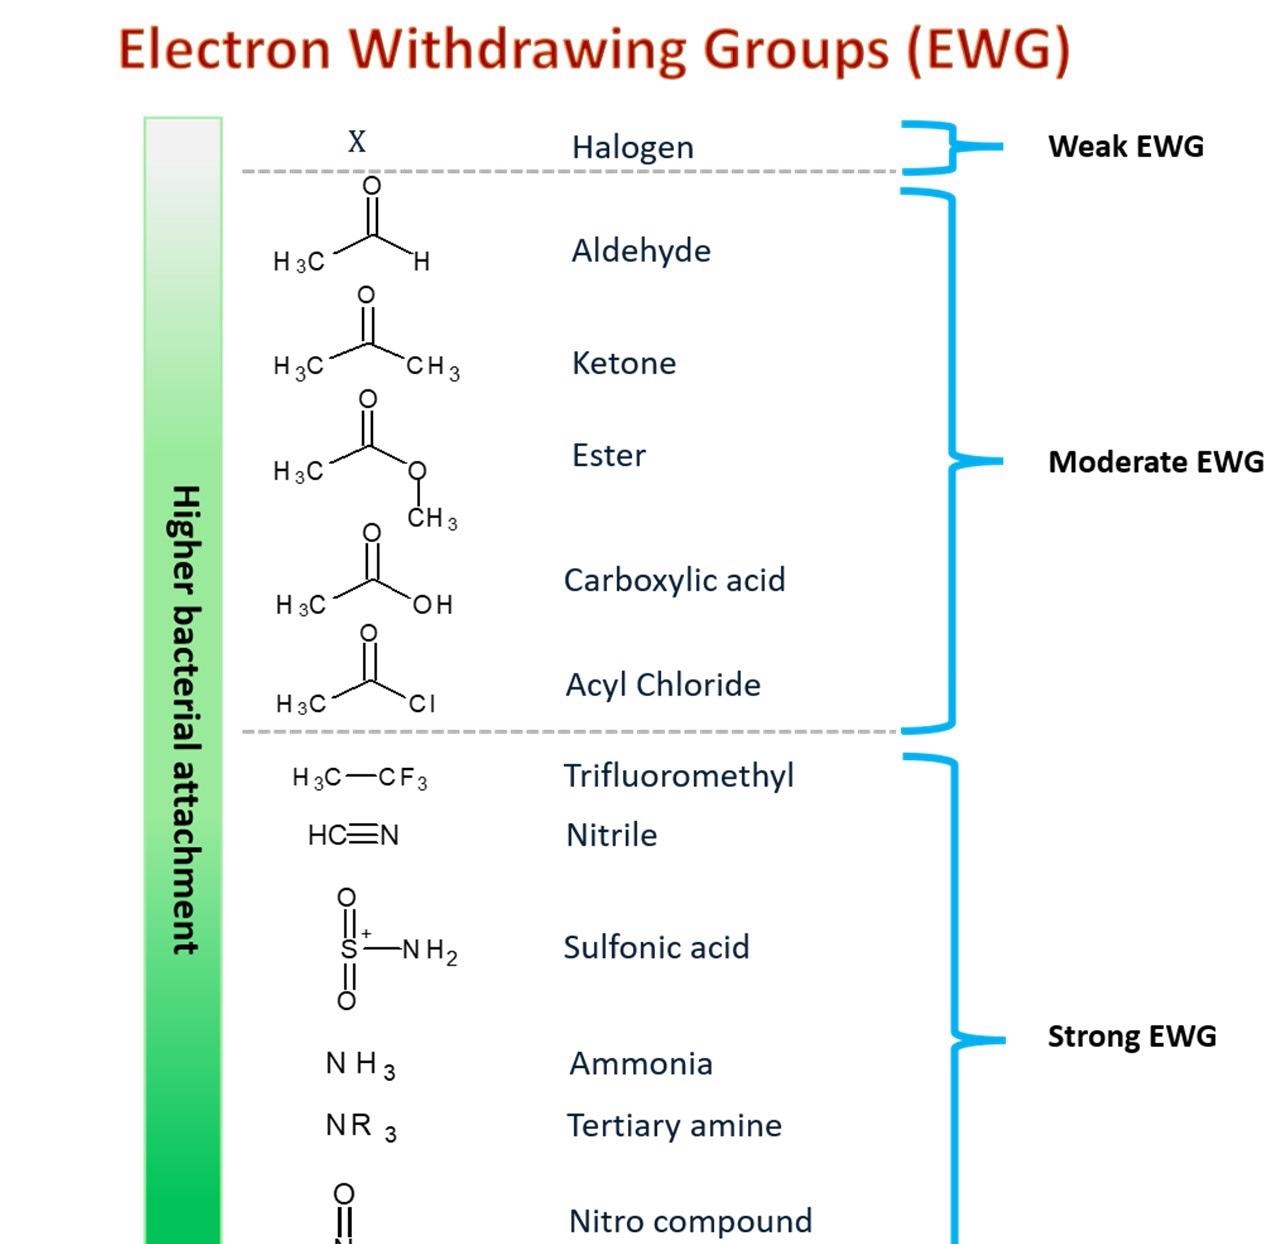 Electron withdrawing group and functional moieties can be functionalized on nanofiber surfaces to improve bacterial adhesion and attachment. The stronger EWGs exhibit higher bacterial attachments.